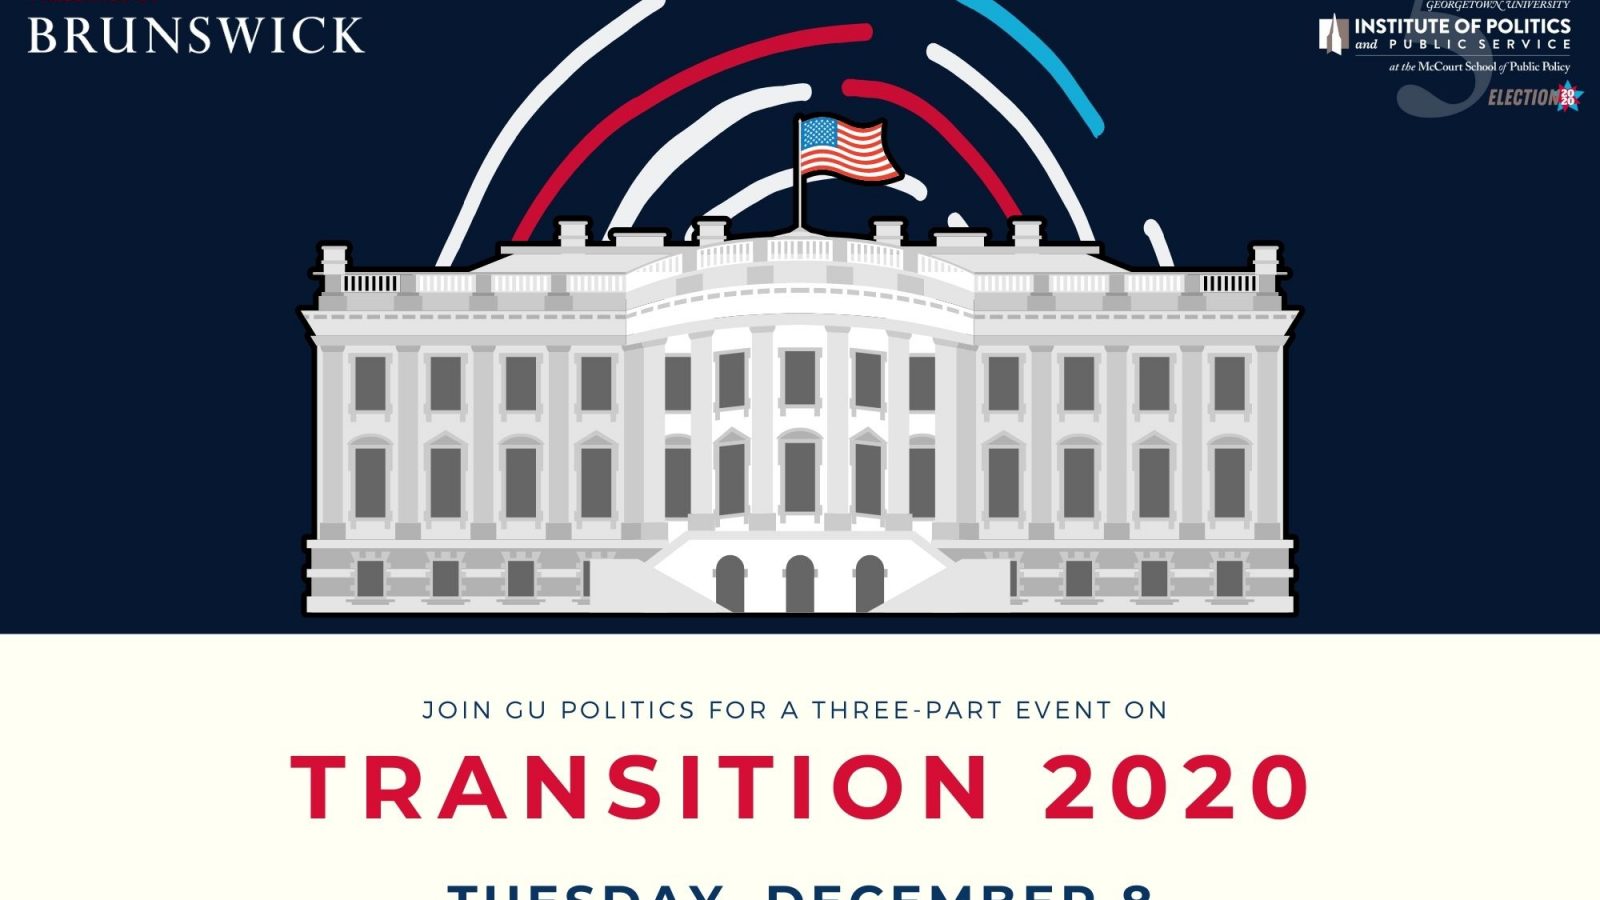 Georgetown Institute of Politics and Public Service (GU Politics) on Tuesday, December 8 for a three-part event, 